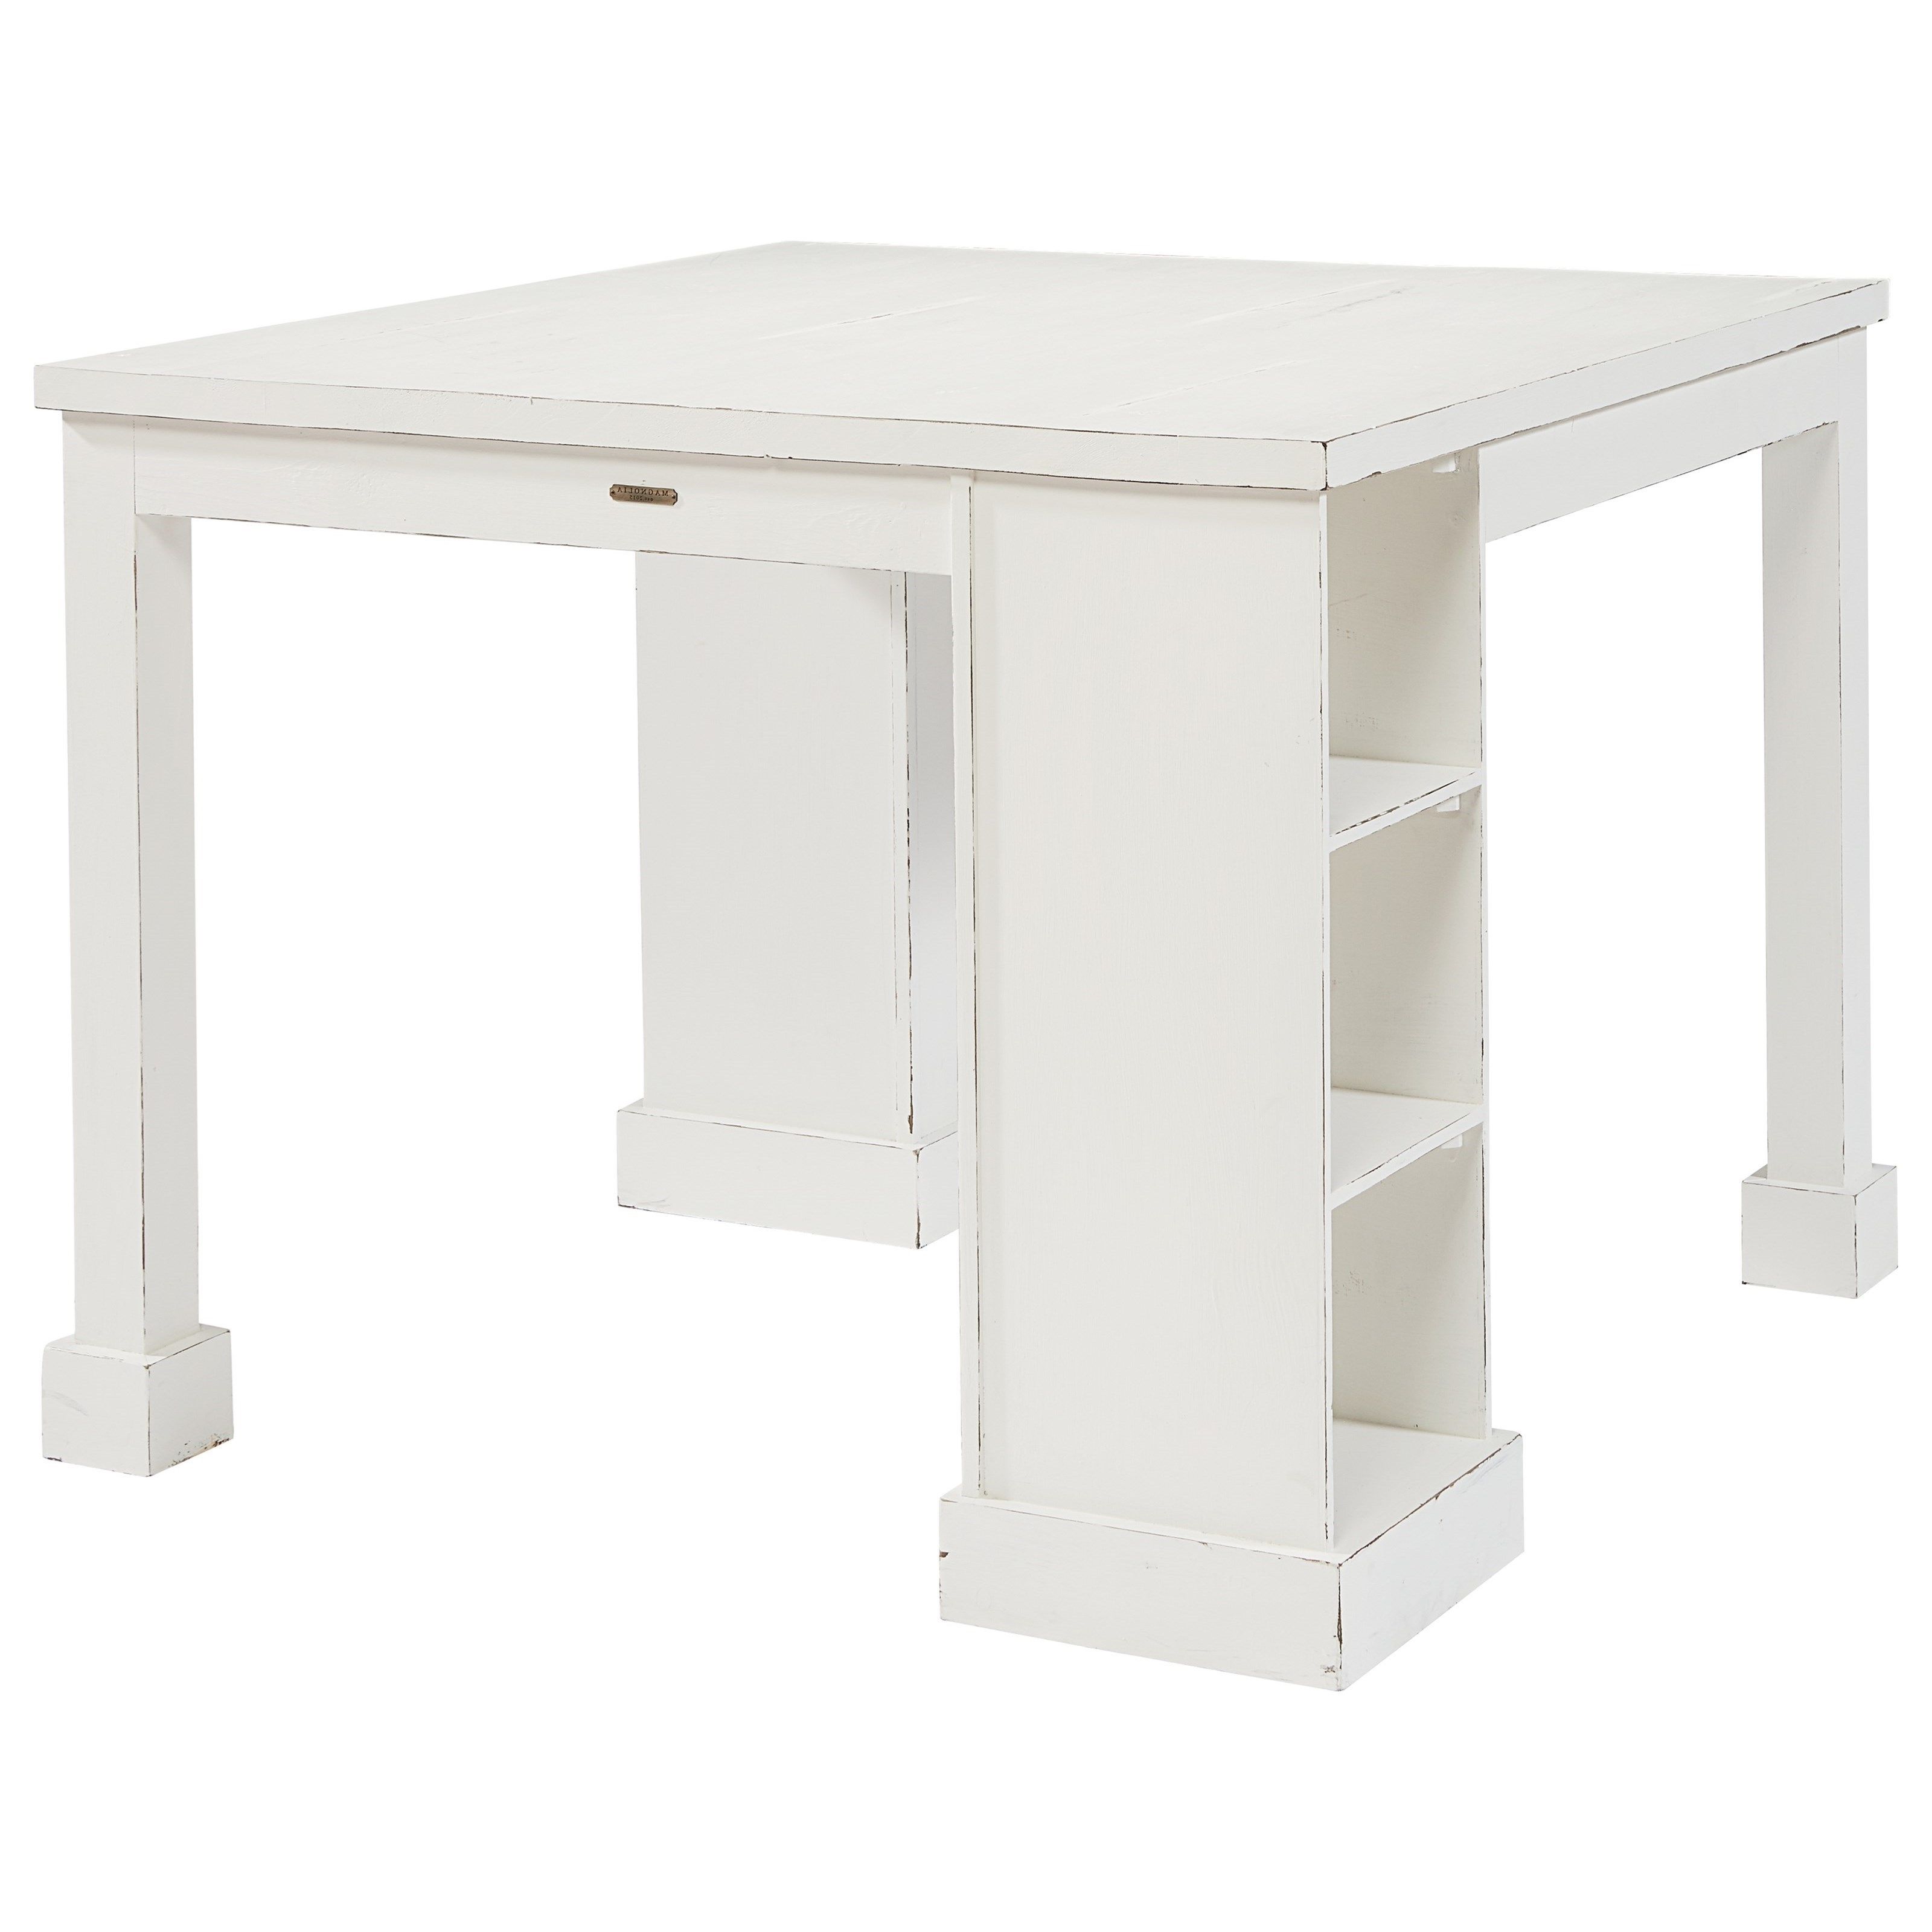 Latest Magnolia Home Scallop Antique White Cocktail Tables In Craft Table With Corner Storage And Cubby Shelvesmagnolia Home (View 10 of 20)